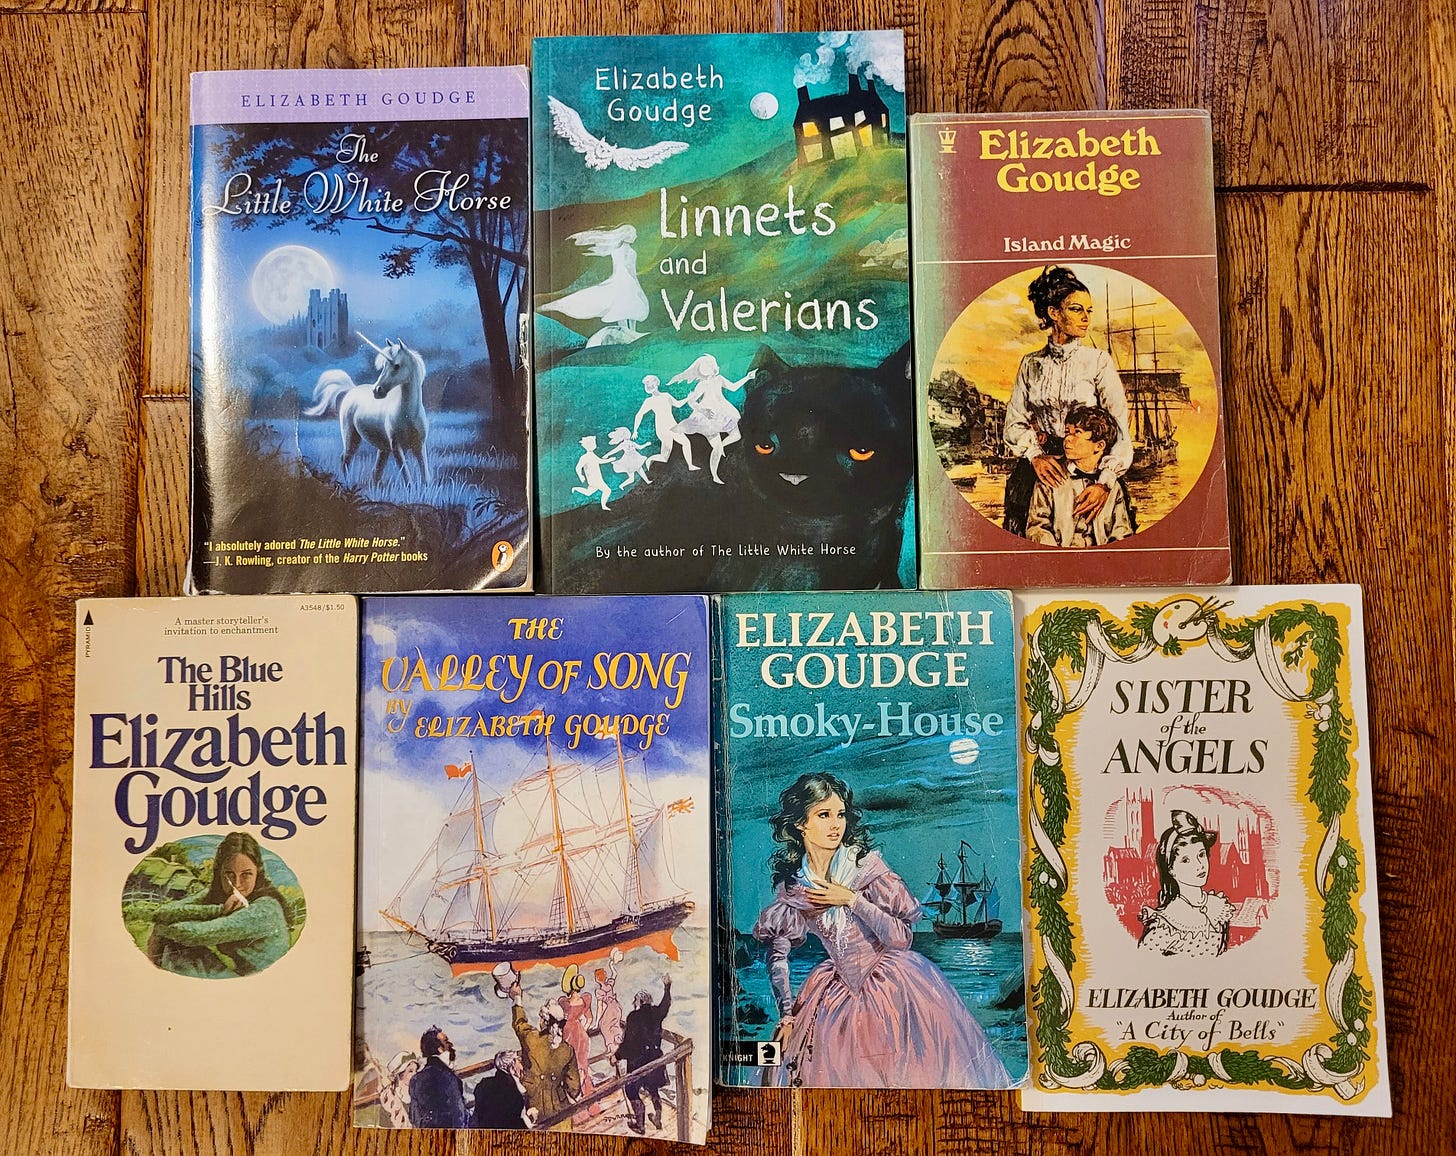 Paperback covers of Goudge’s children’s books and Island Magic. Photo by Stephanie Nygaard